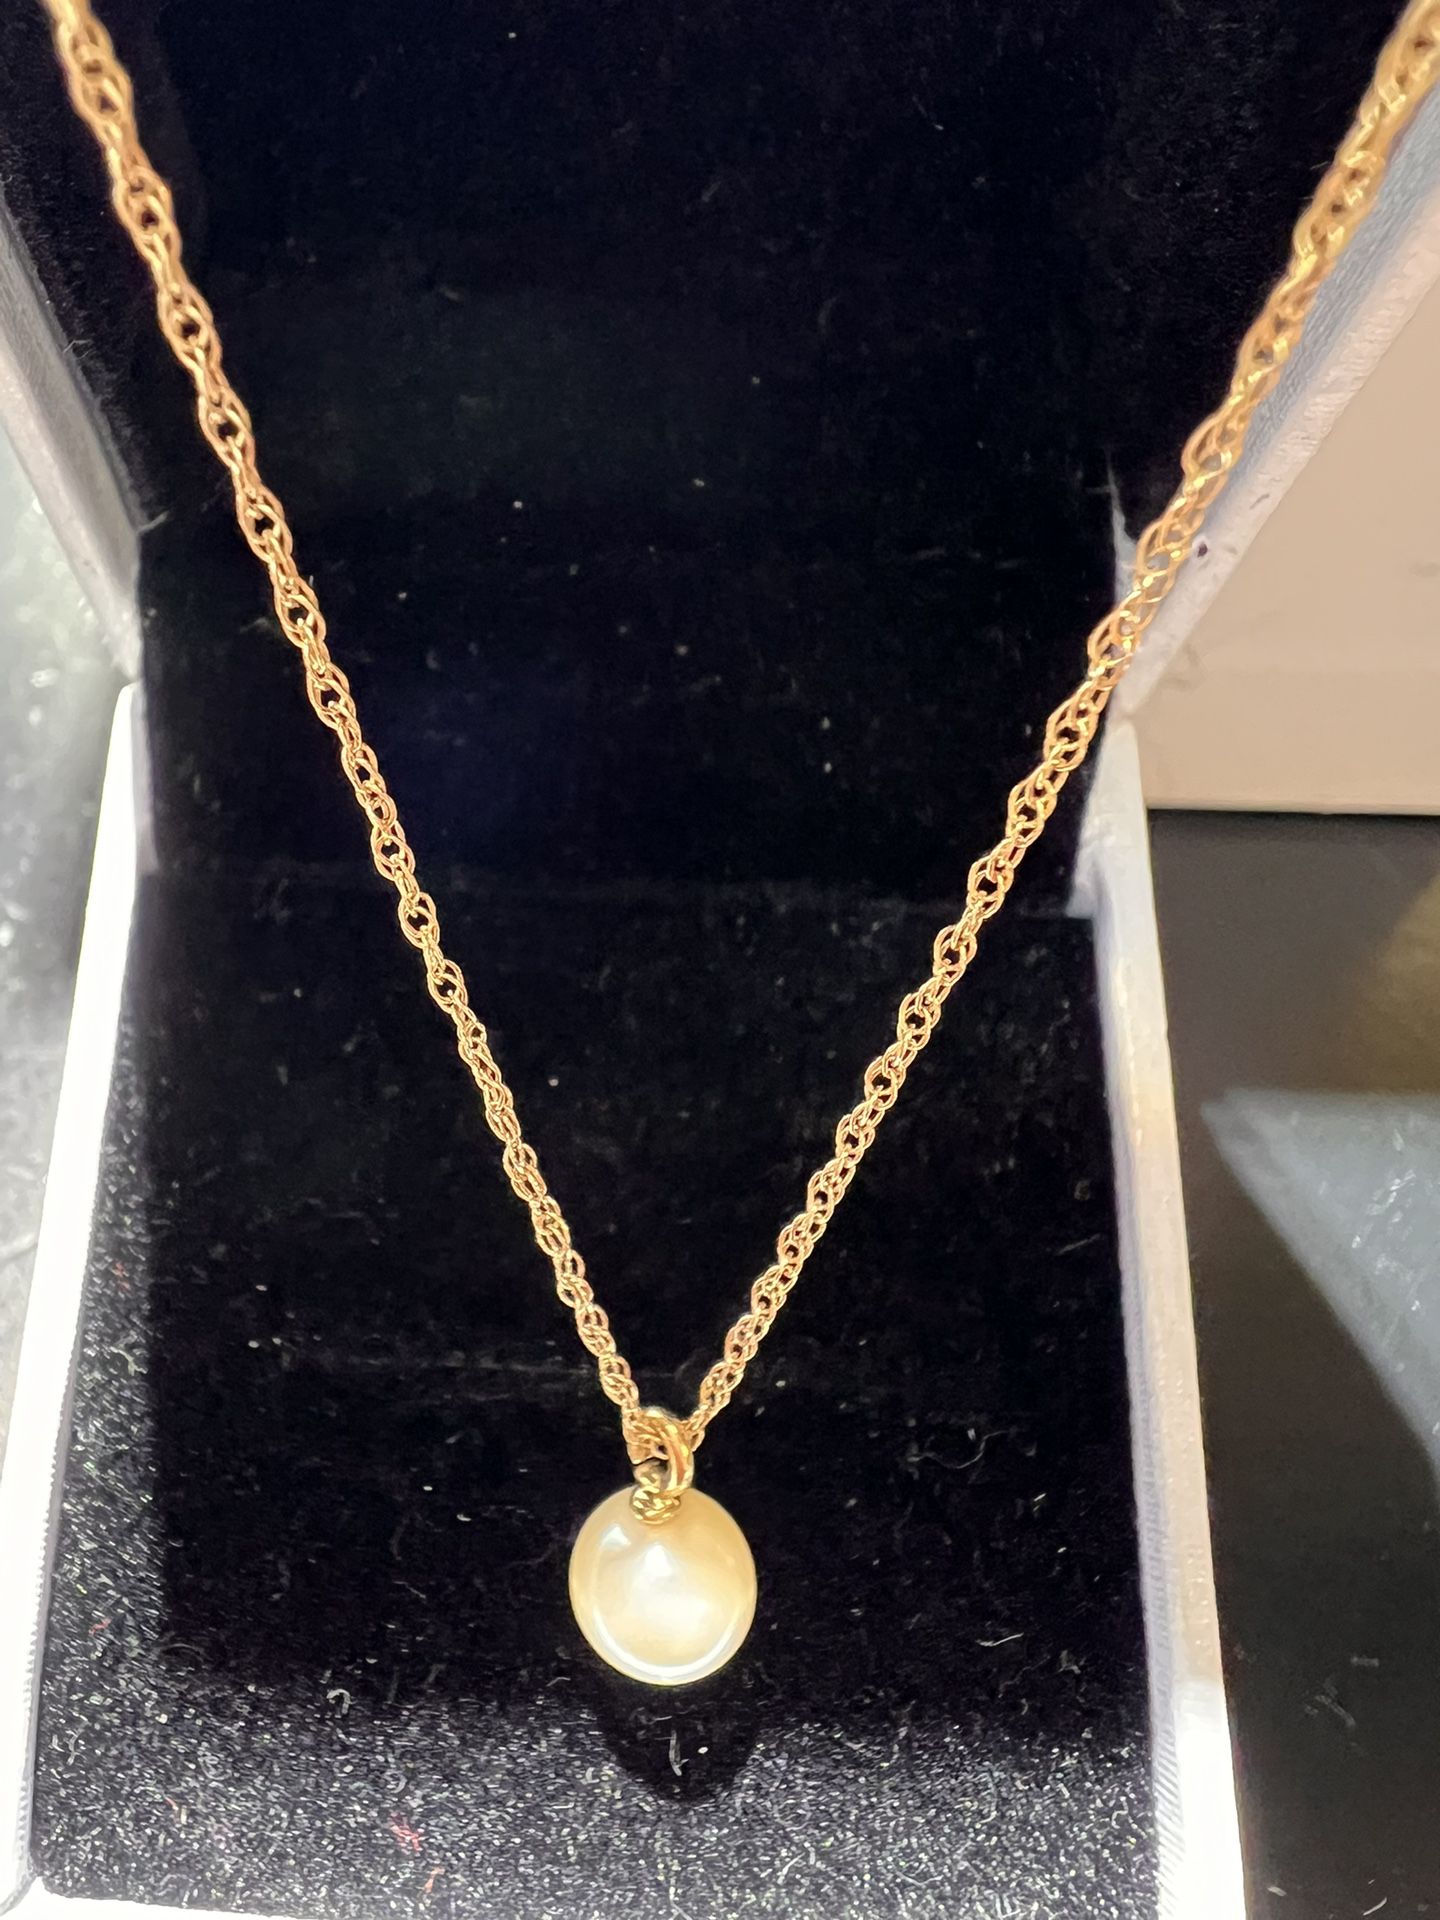 BEAUTIFUL 14K YELLOW GOLD NECKLACE AND PENDANT NATURAL FRESH PEARL 